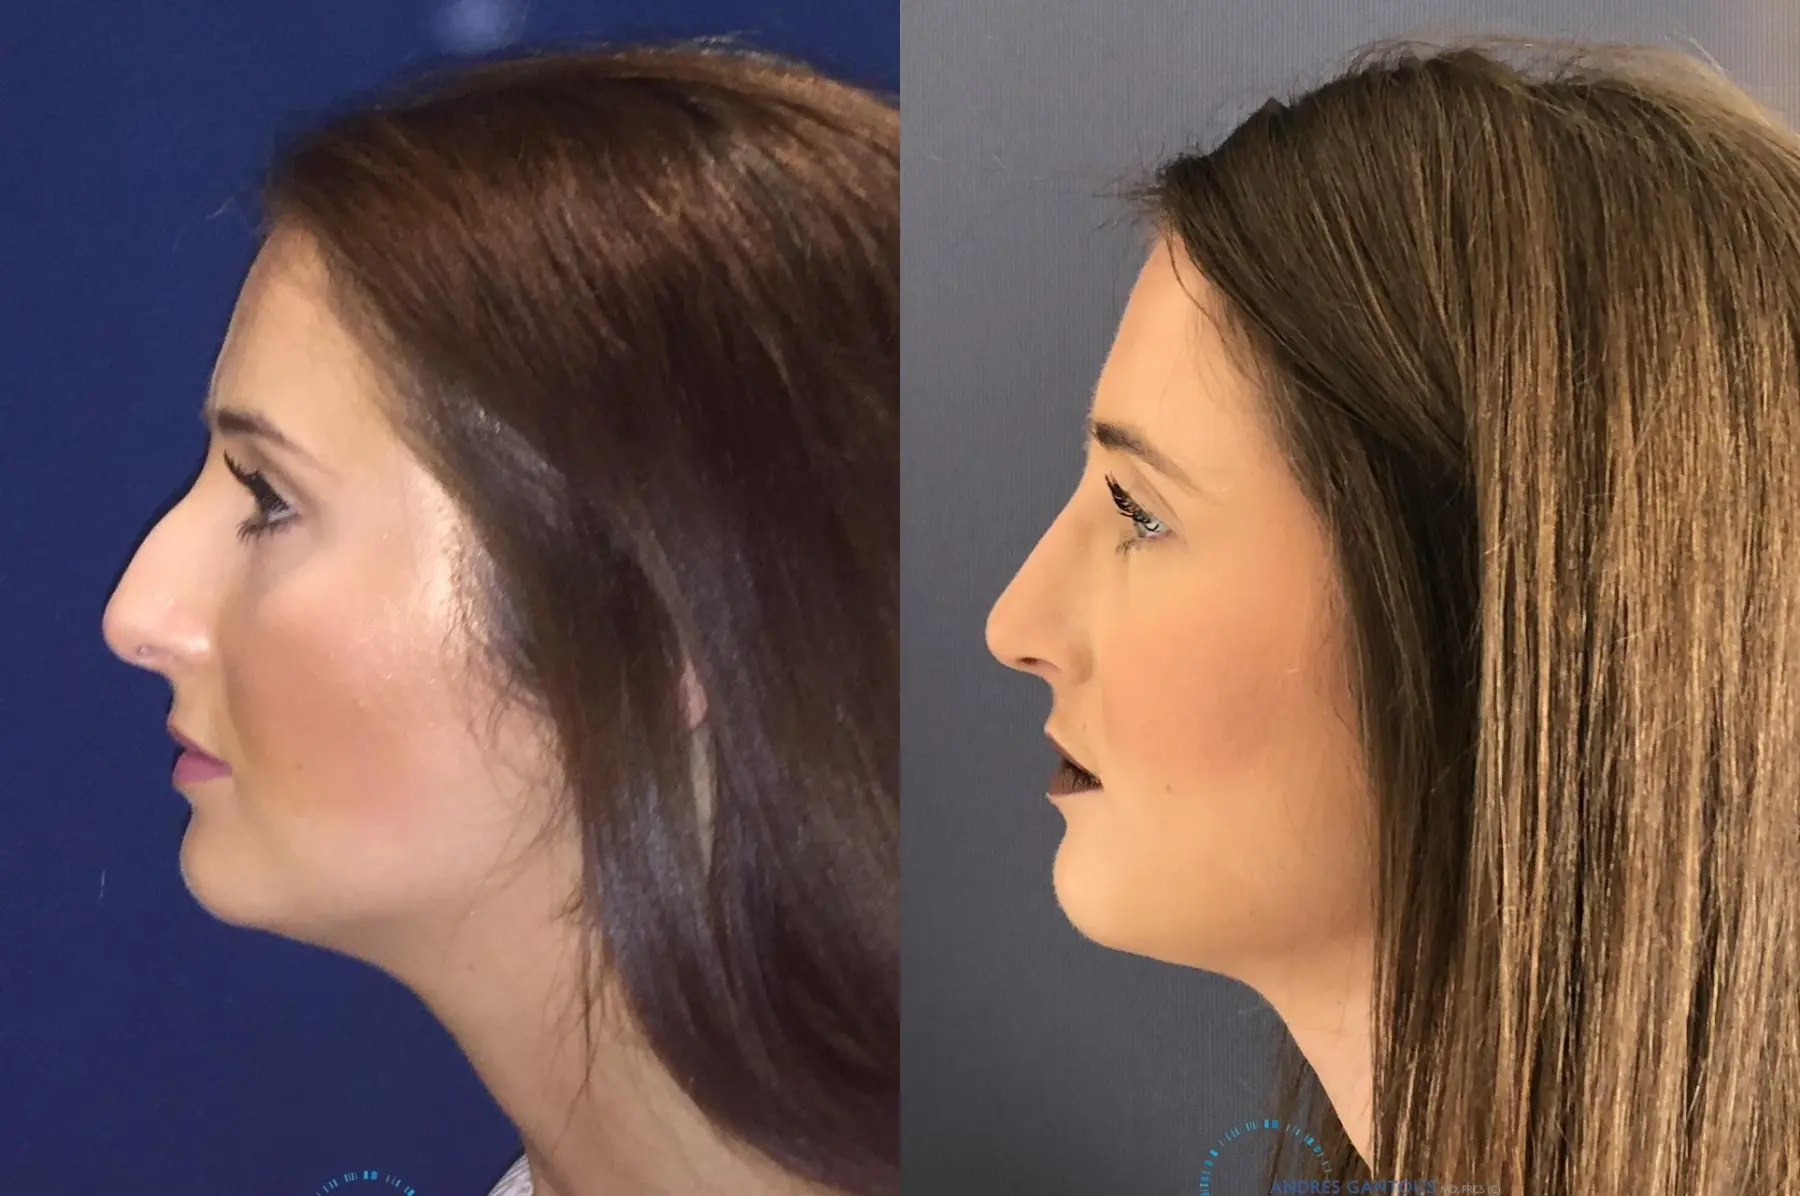 Rhinoplasty: Patient 1 - Before and After 5